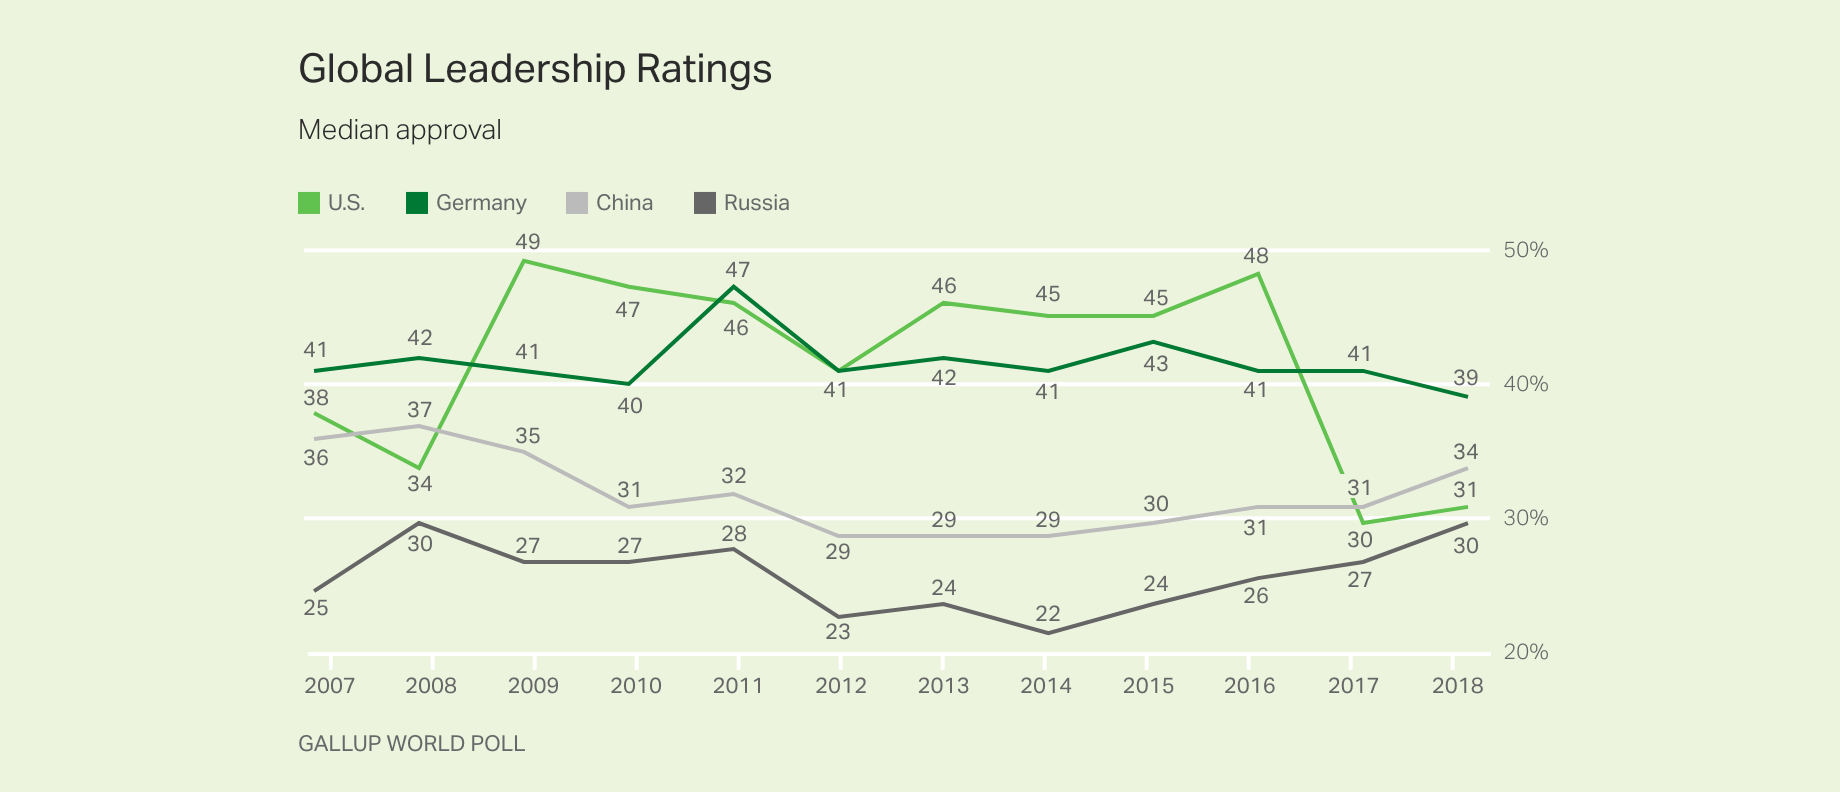 Line graph. Germanyâ€™s leadership earns the highest approval ratings worldwide, while Russia and the U.S. tie for the lowest.